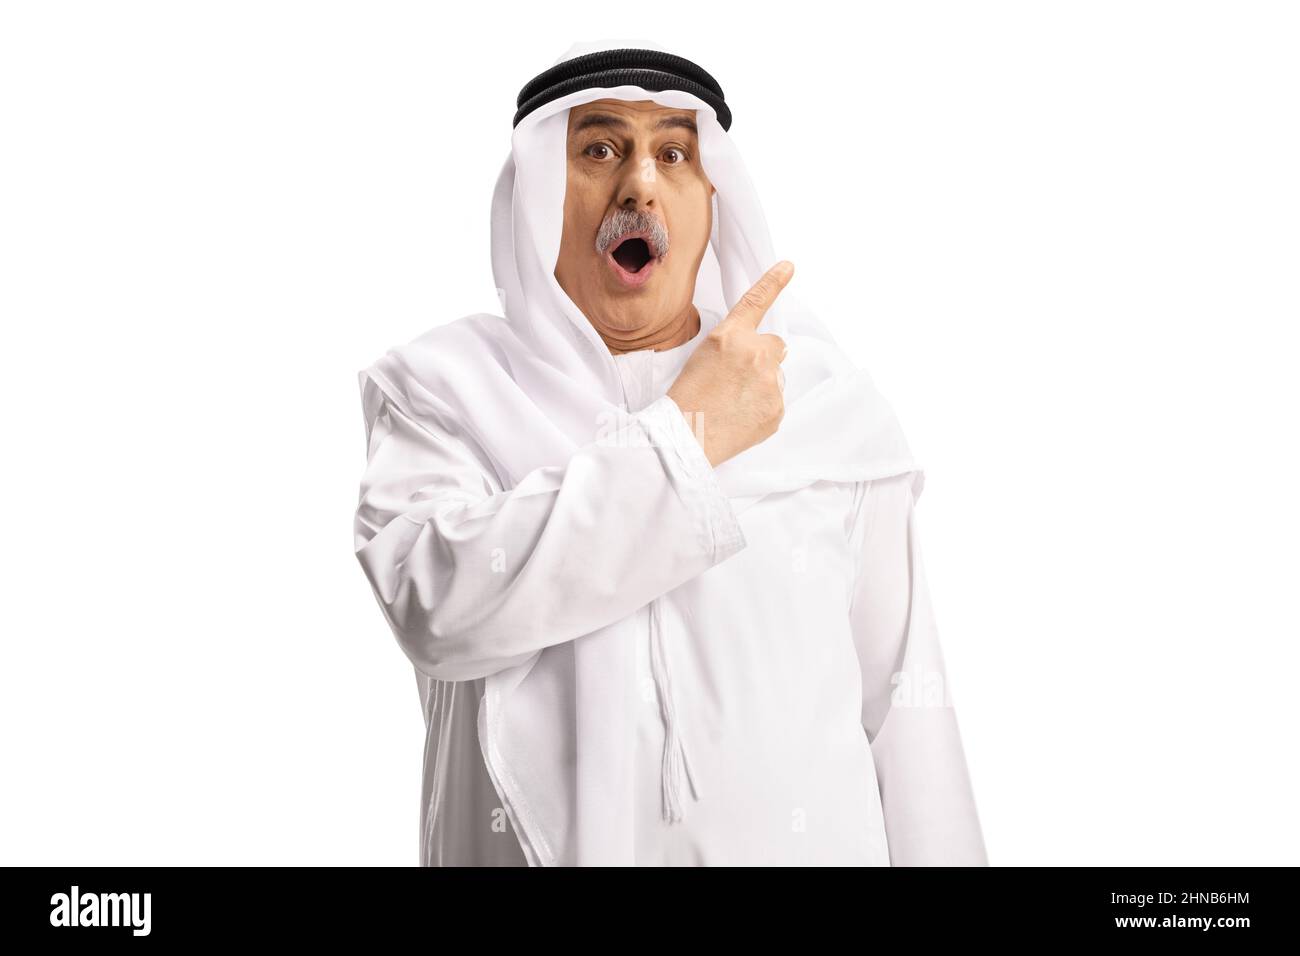 Surprised mature arab man pointing with finger isolated on white background Stock Photo